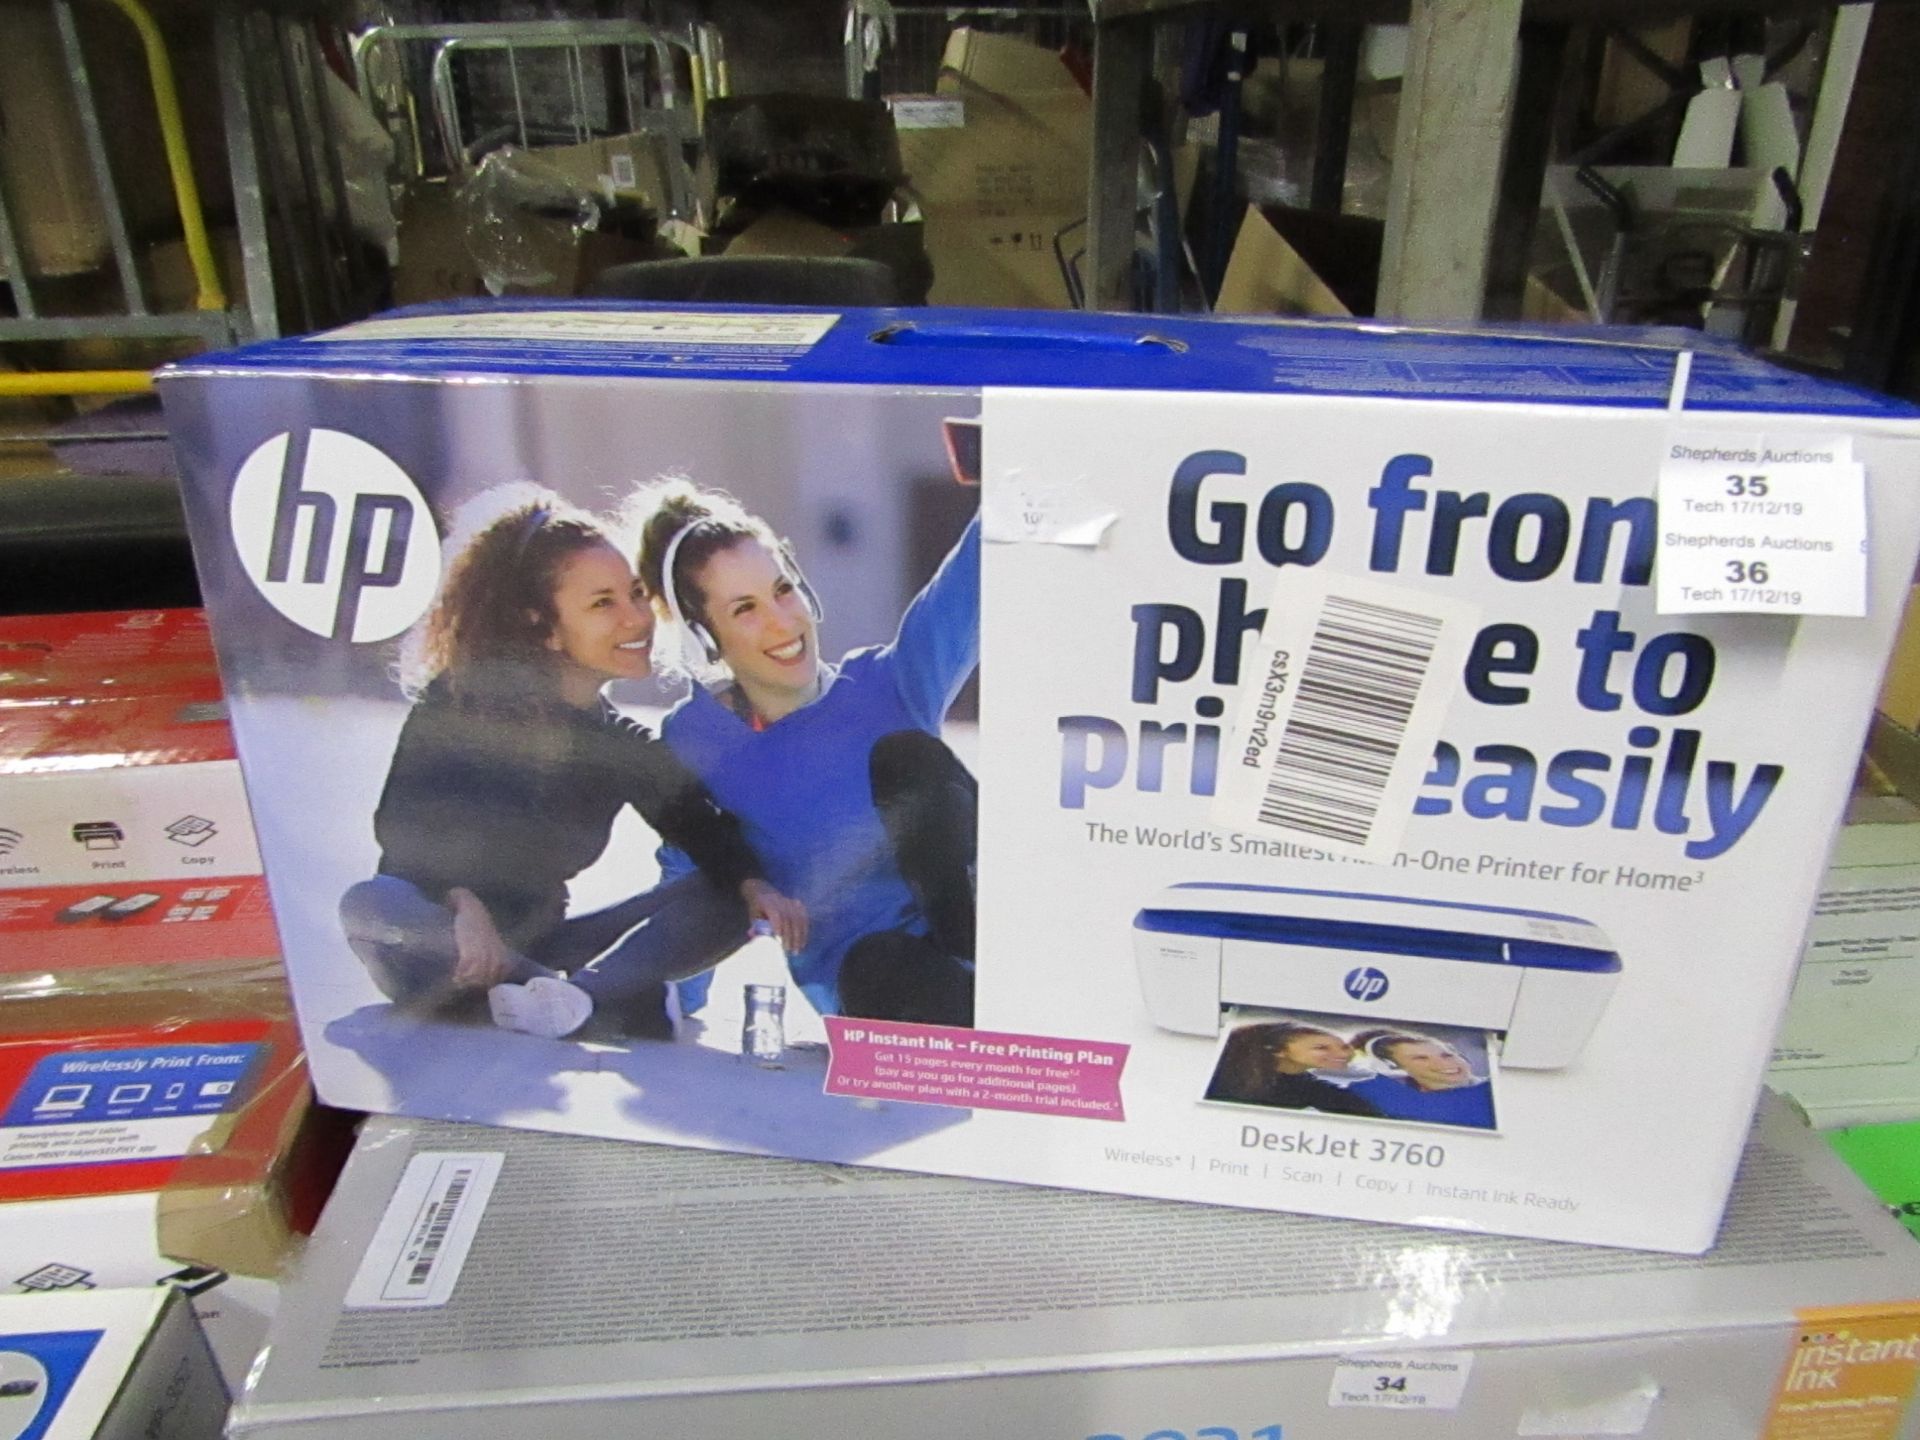 HP Desk Jet 3760 wireless printer, boxed and unchecked